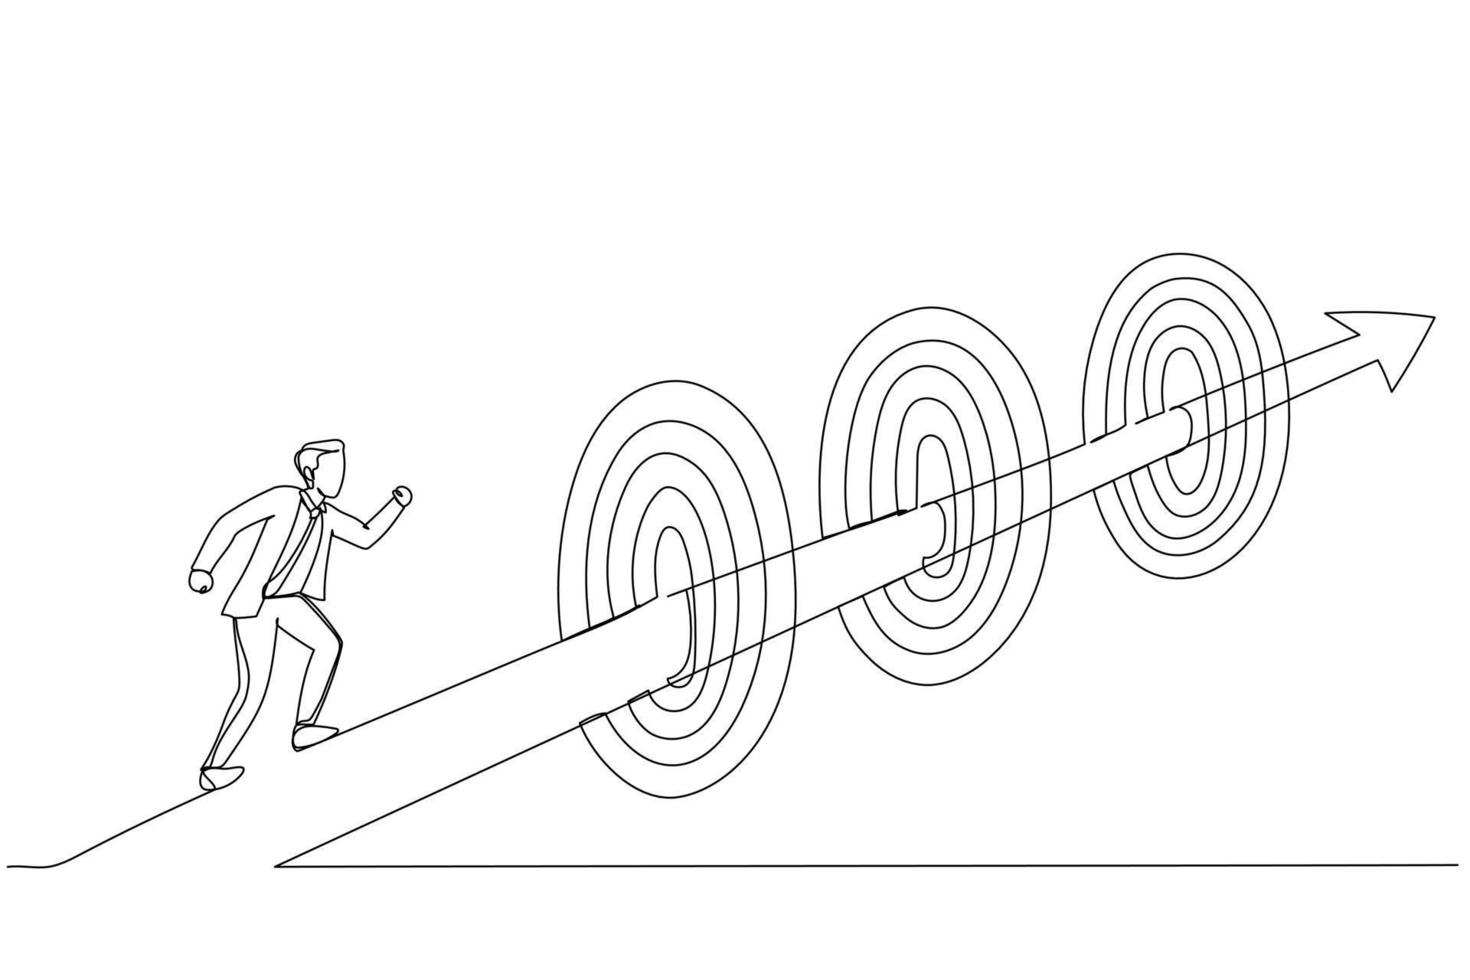 Drawing of businessman running on arrow way through targets. Metaphor for achievements or challenge to achieve targets and business goals. Single continuous line art vector